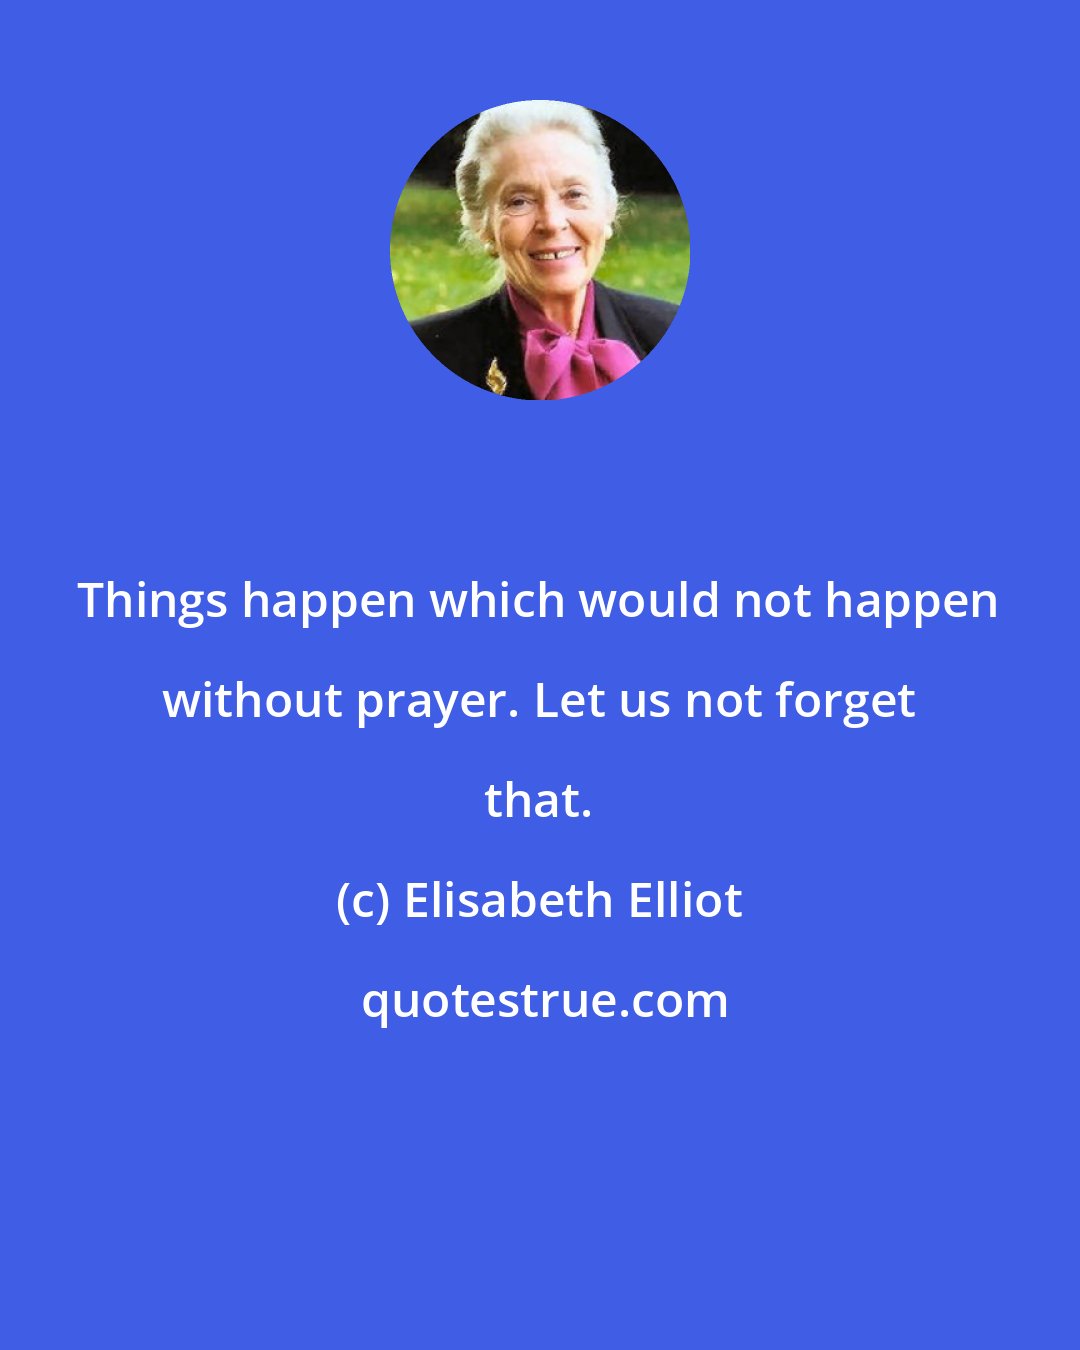 Elisabeth Elliot: Things happen which would not happen without prayer. Let us not forget that.